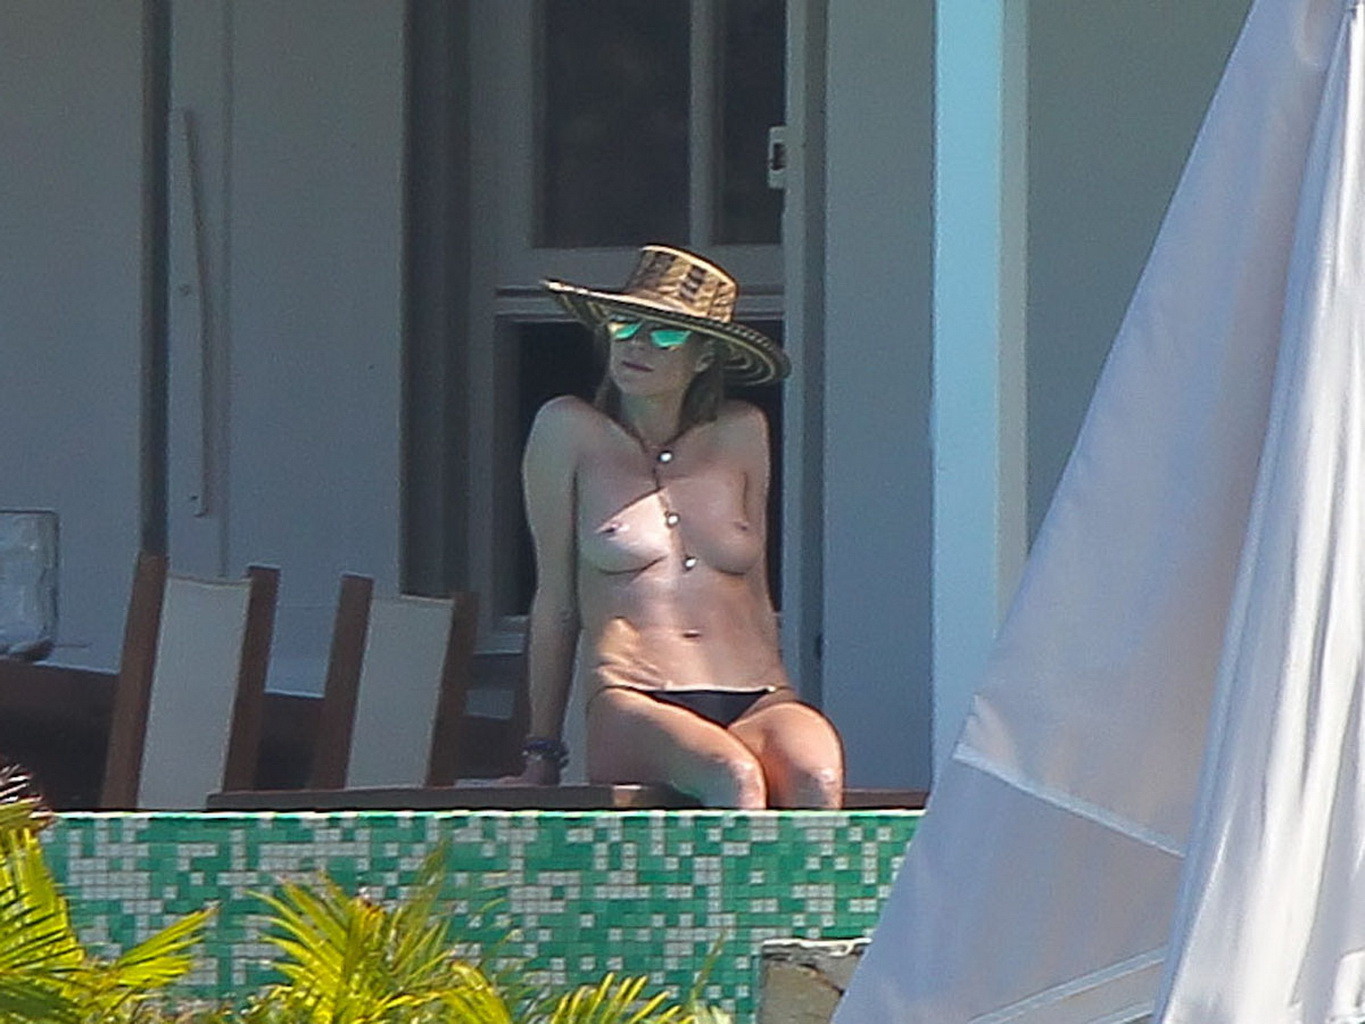 Heidi Klum caught topless wearing only black panties while on vacation in StBart #75177026